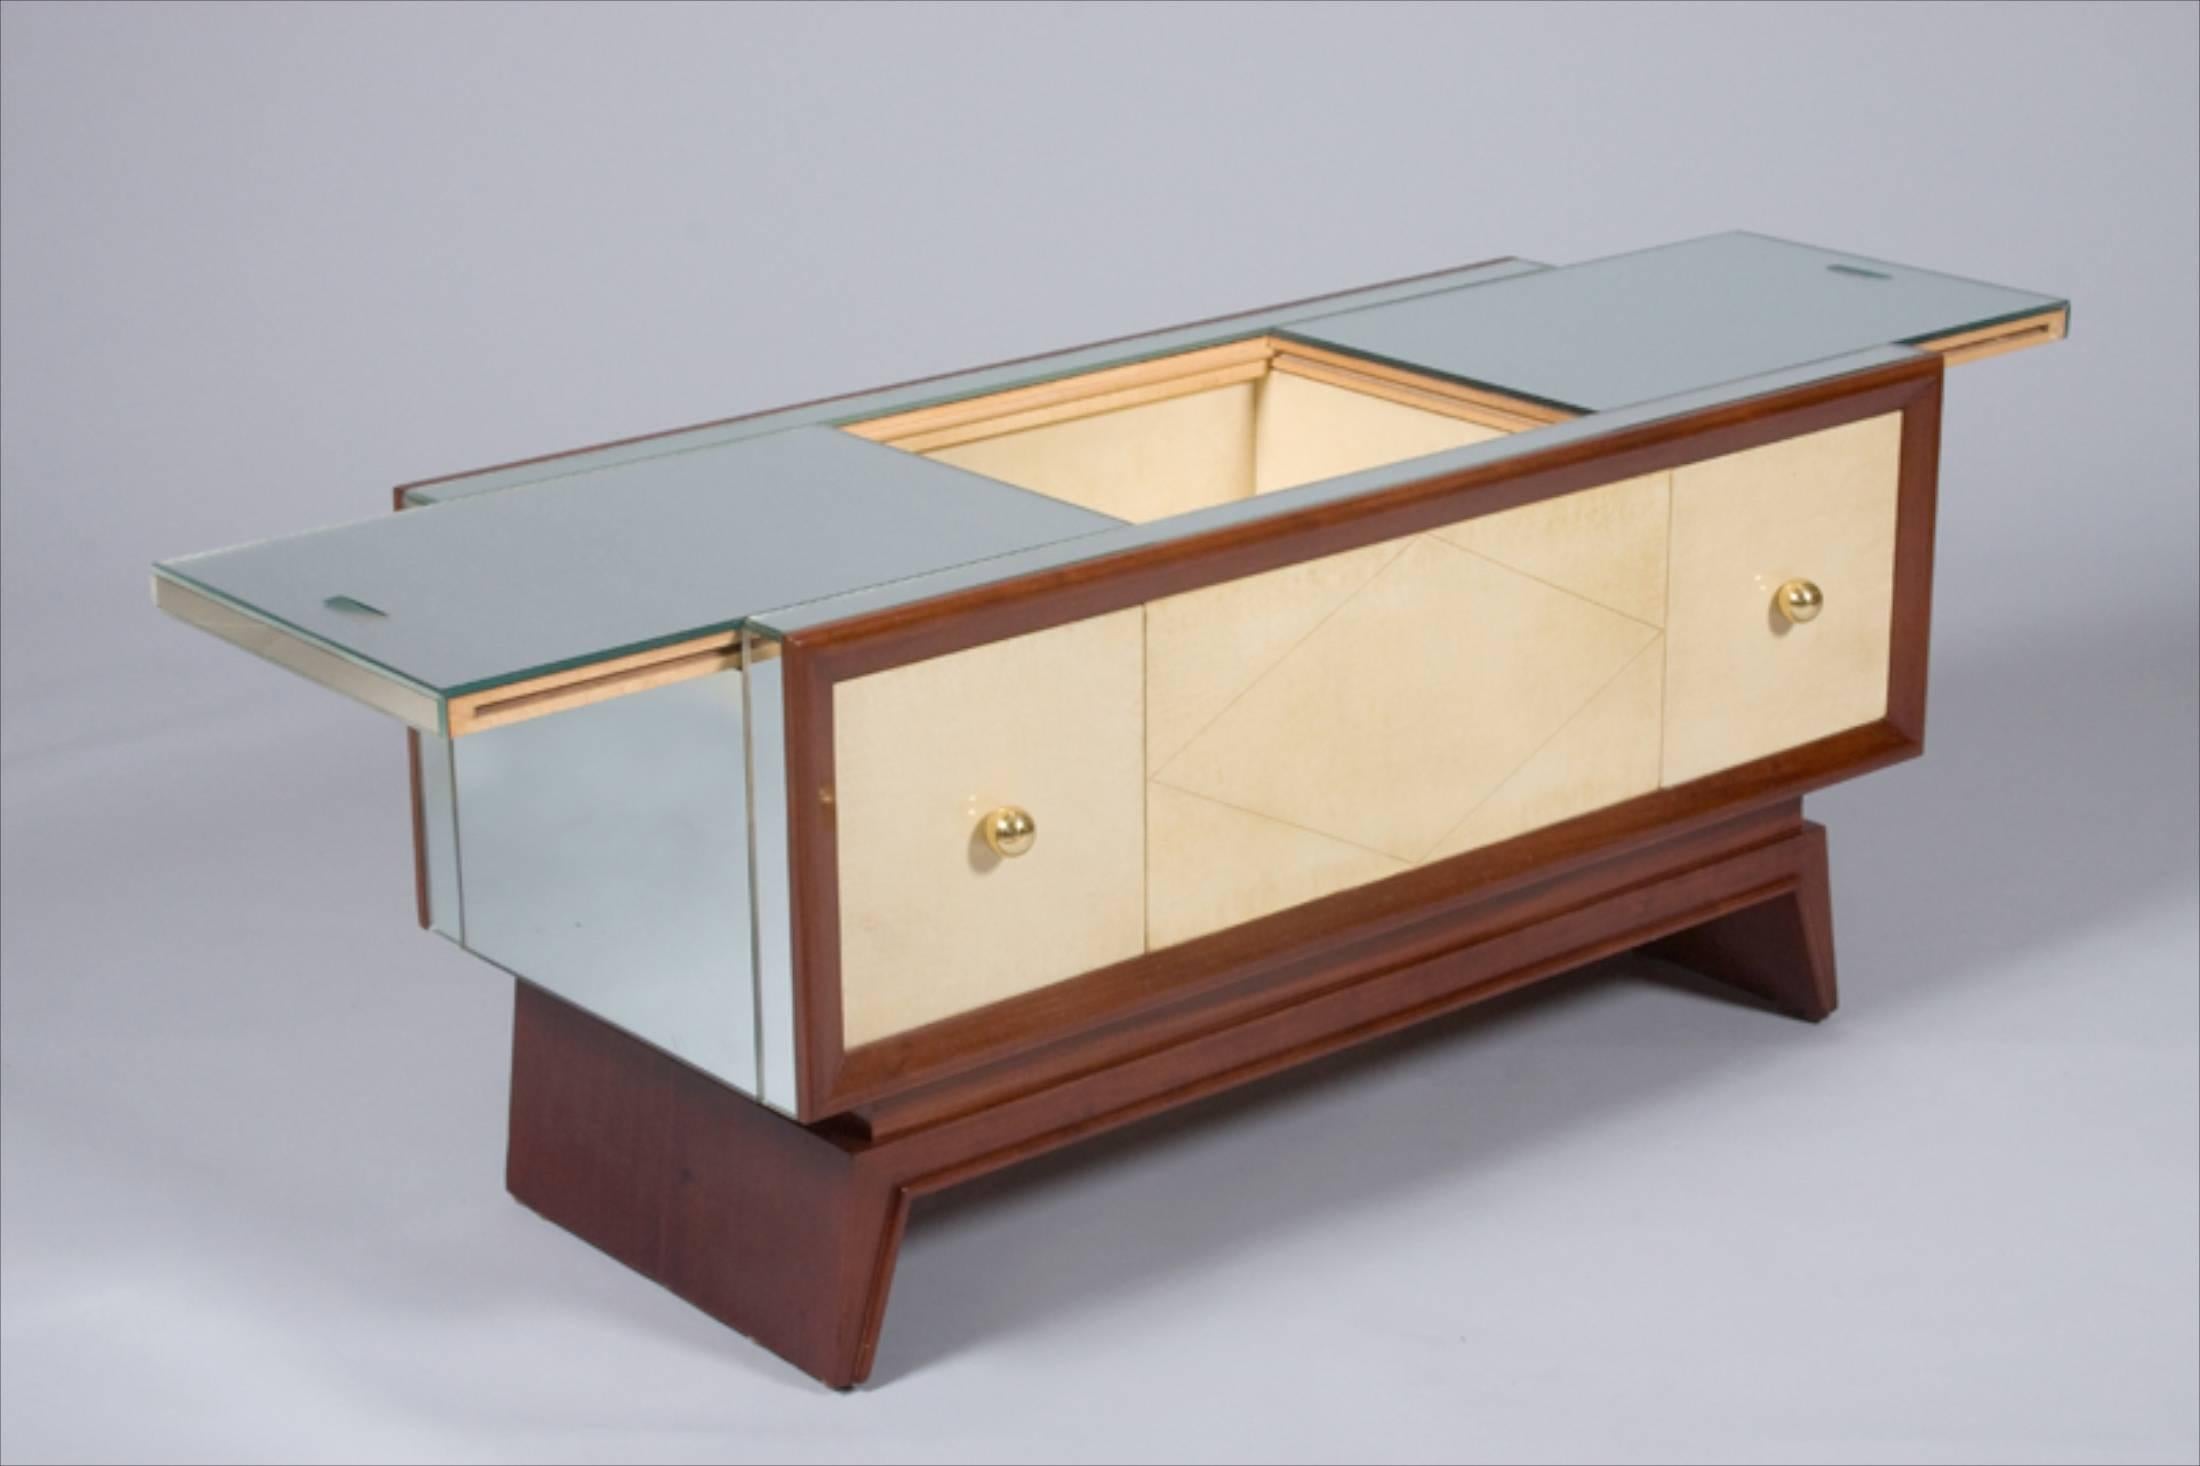 French Art Deco coffee table by Maurice Champion, circa 1935, in mirror and mahogany with original parchment facings and bronze fittings. Slides open from center to reveal fully parchment-lined storage.